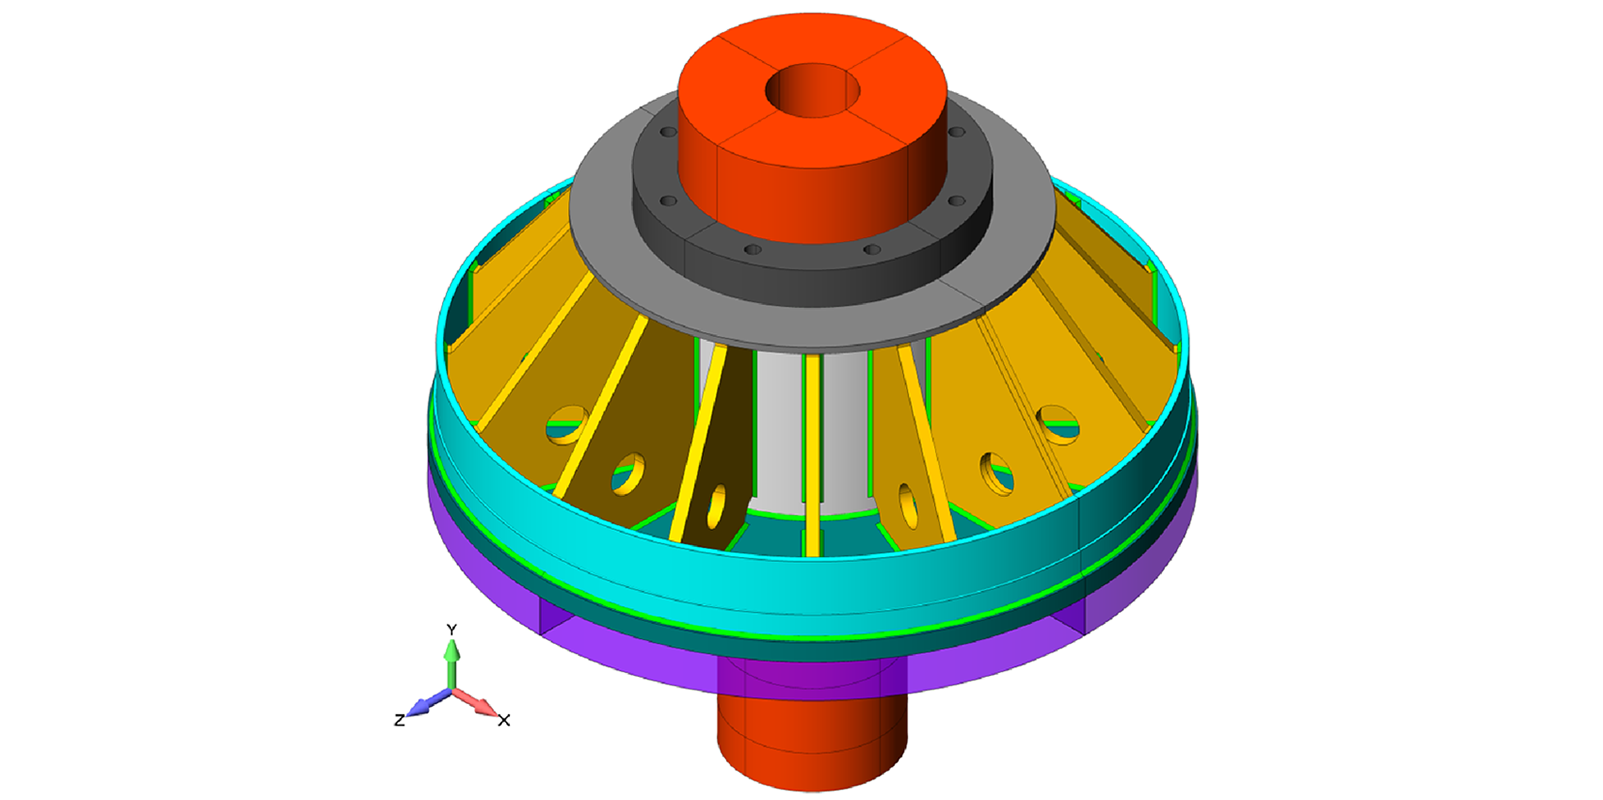 FE model Hydroelectric Turbine Thrust Collar - FEA Thermal-Stress Fatigue Analysis - FEA Consulting Engineers